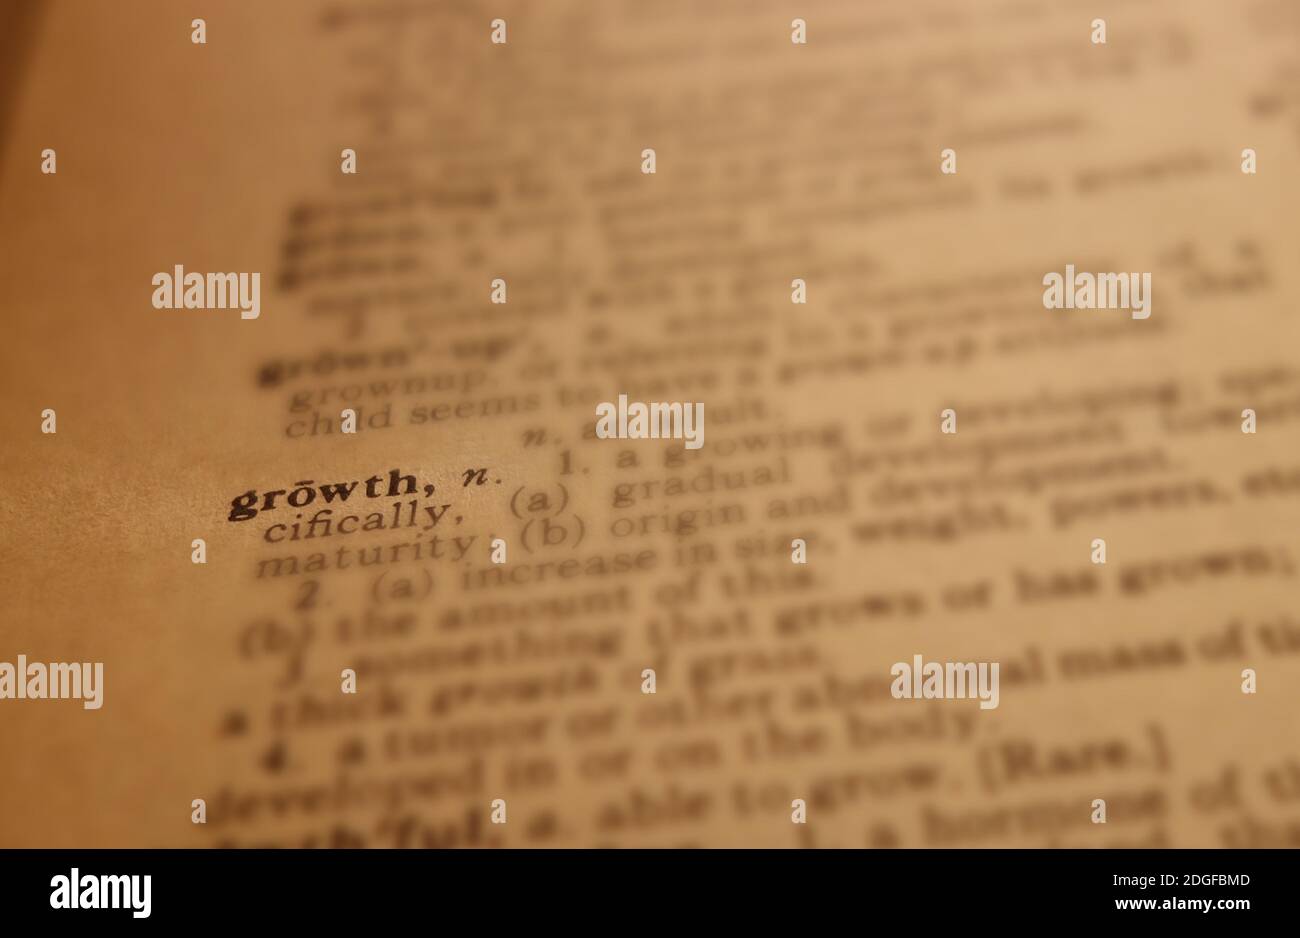 Growth dictionary definition Stock Photo